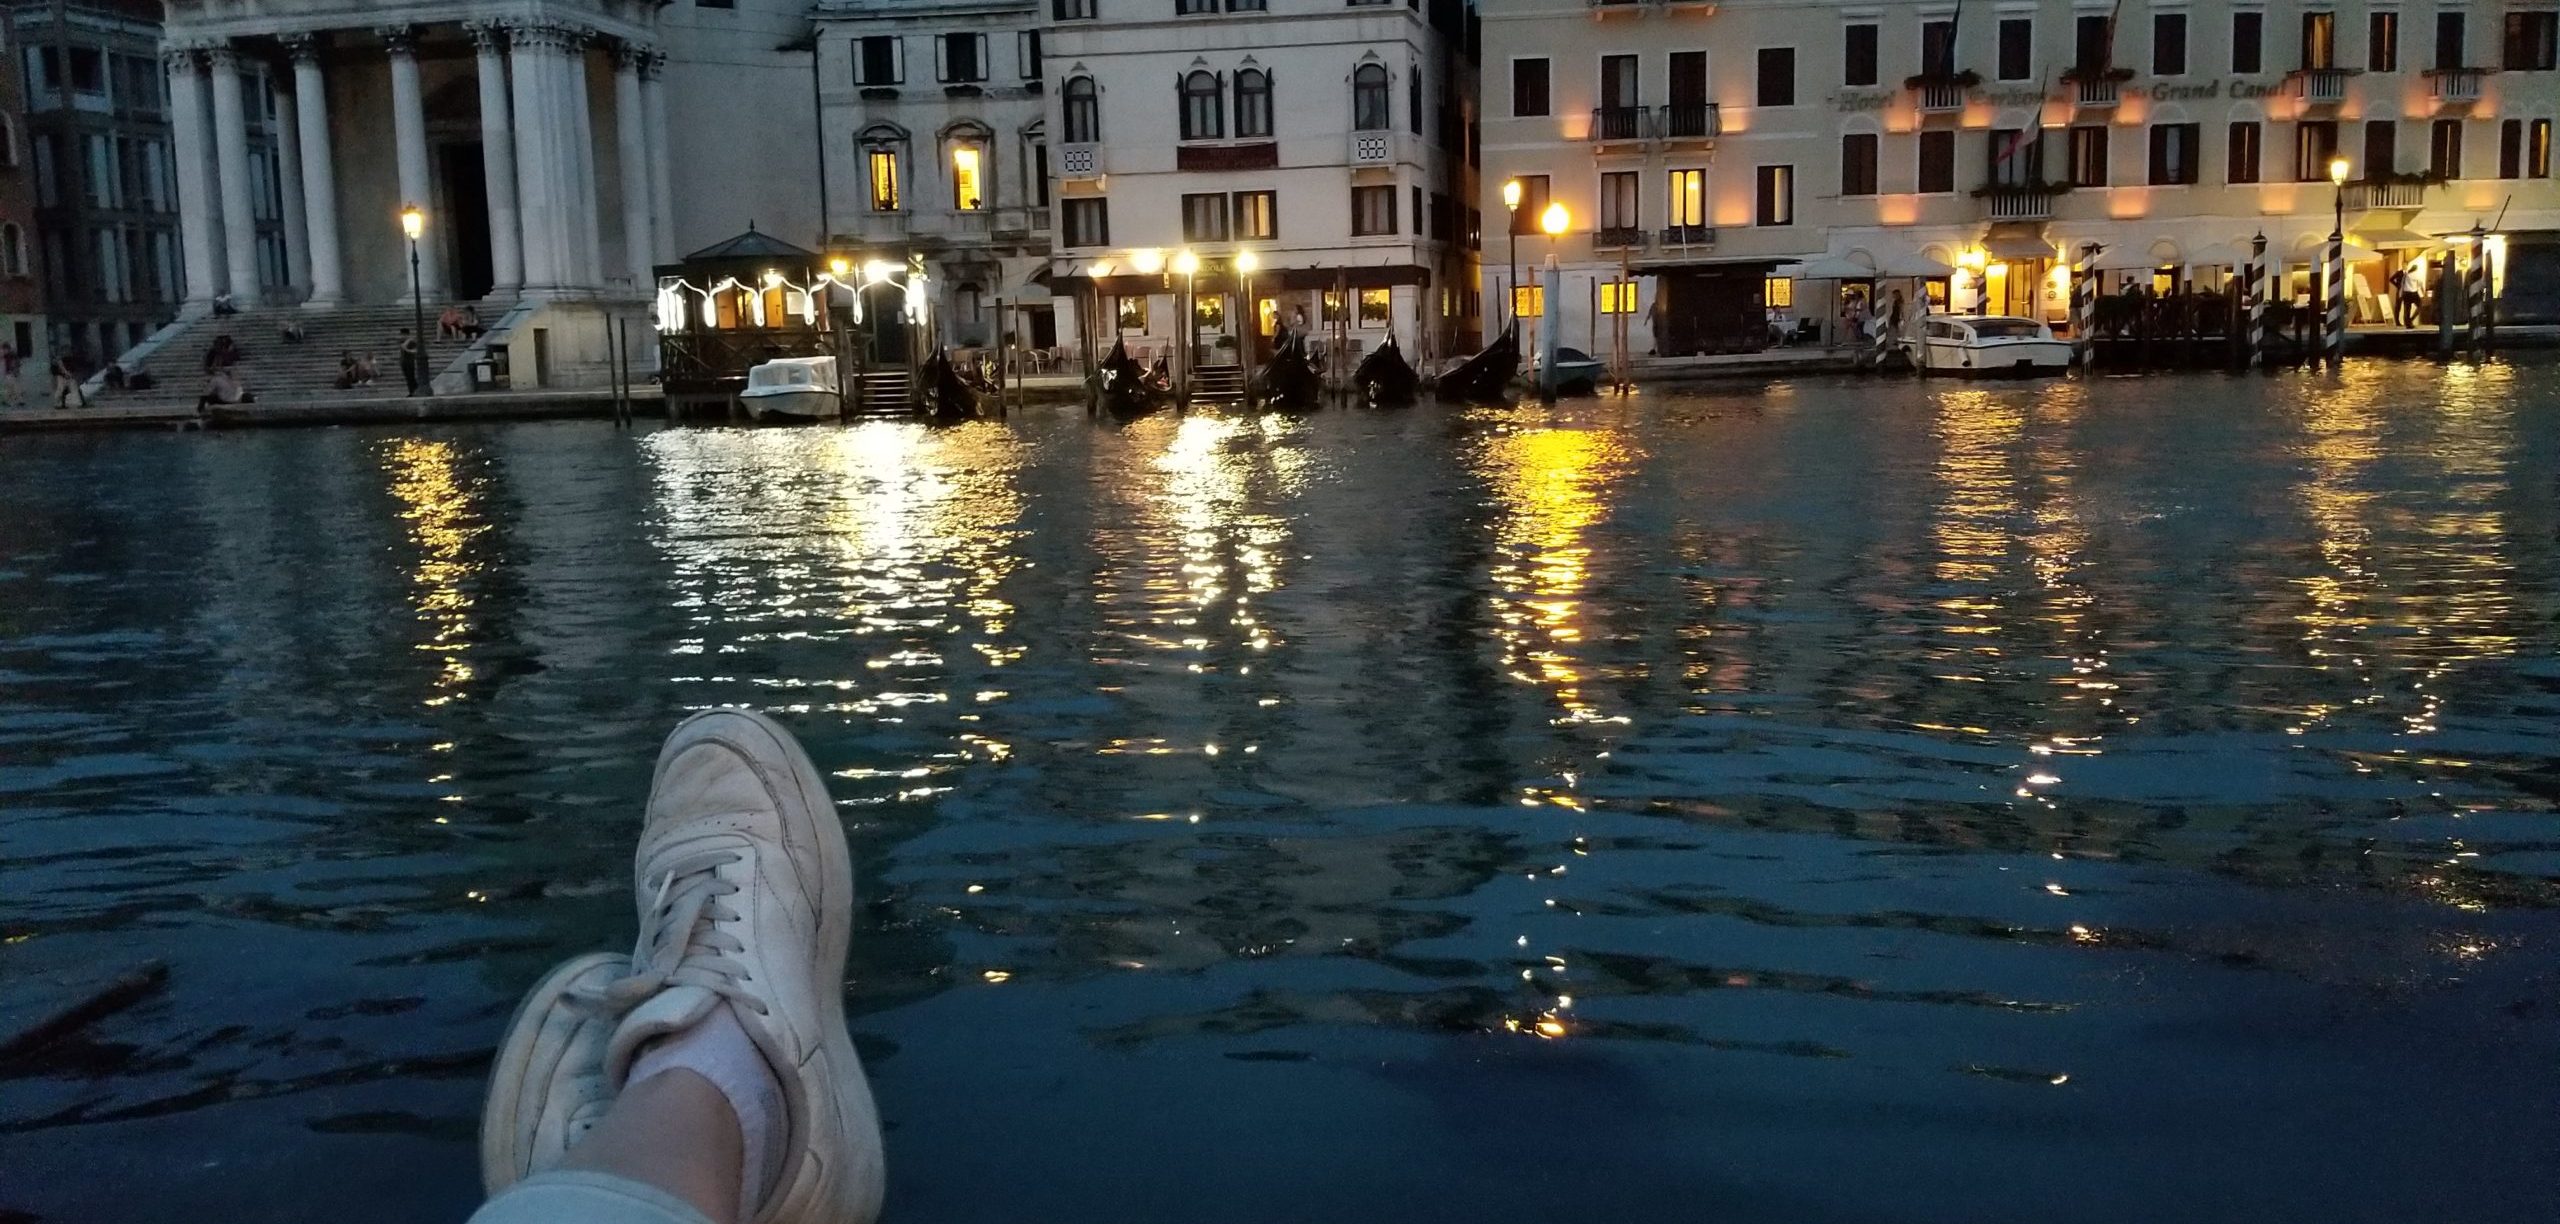 Hanging by the canals in Venice